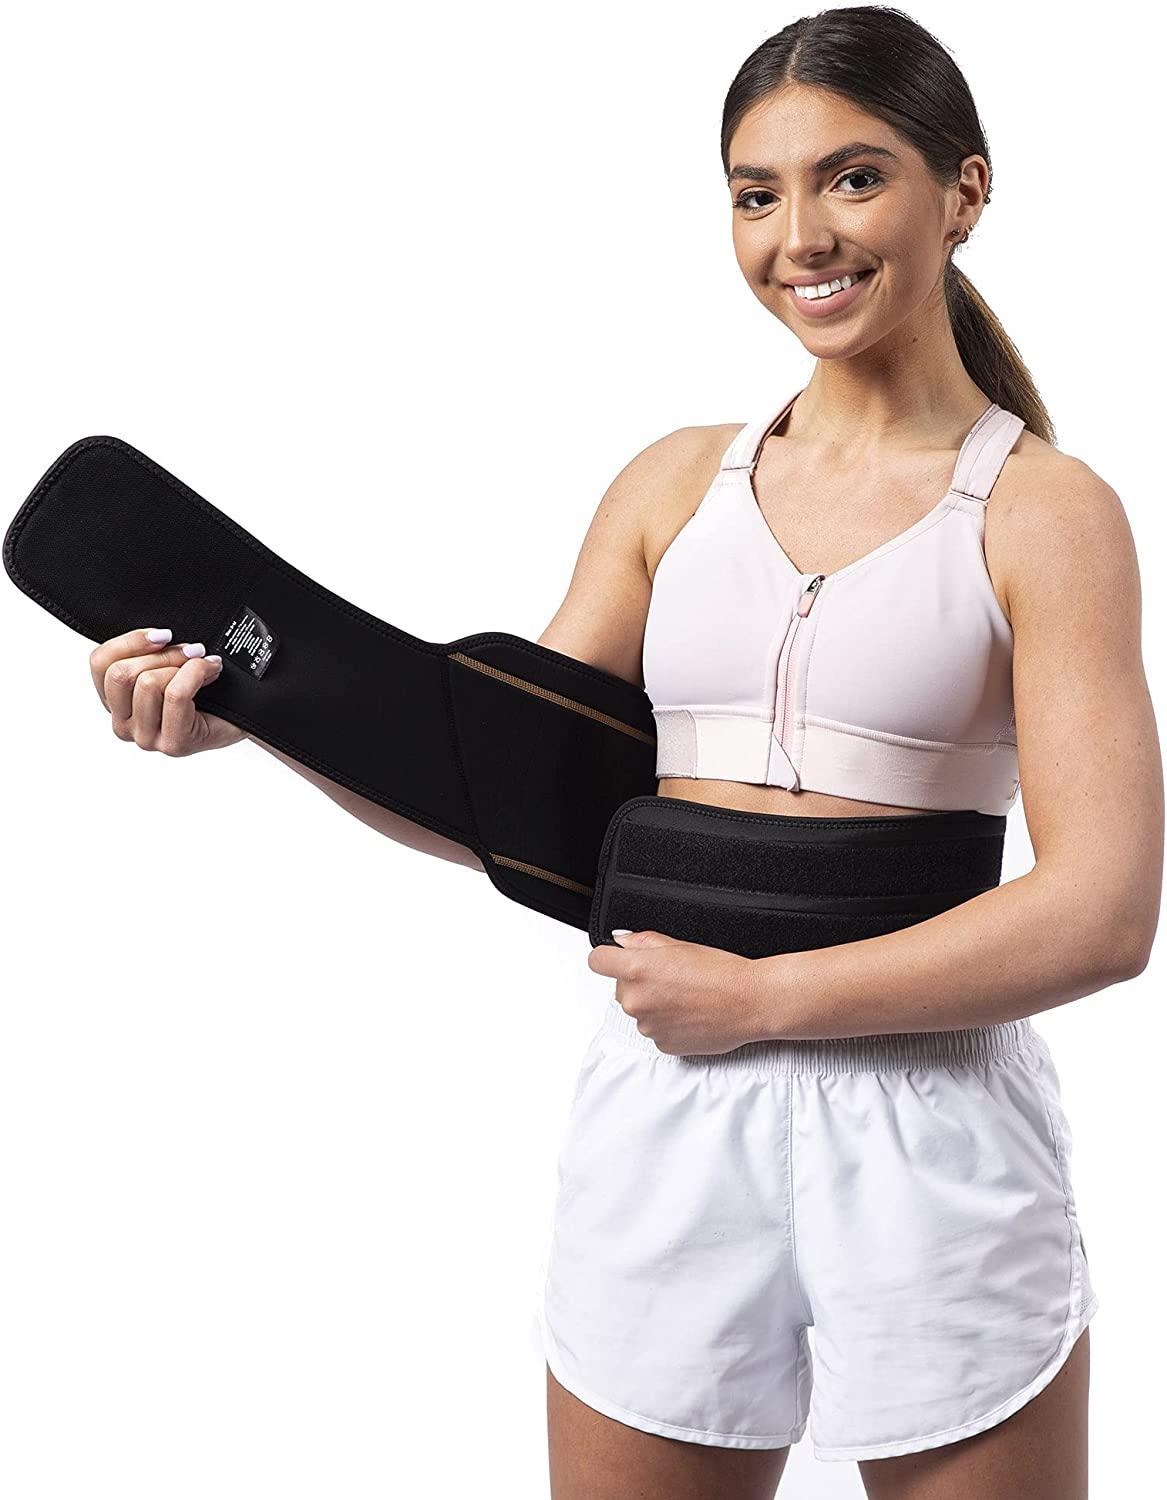 Copper Compression - Recovery Back Brace - Lower Back Pain Relief - Highest  Copper Content - Lumbar Waist Support Belt 